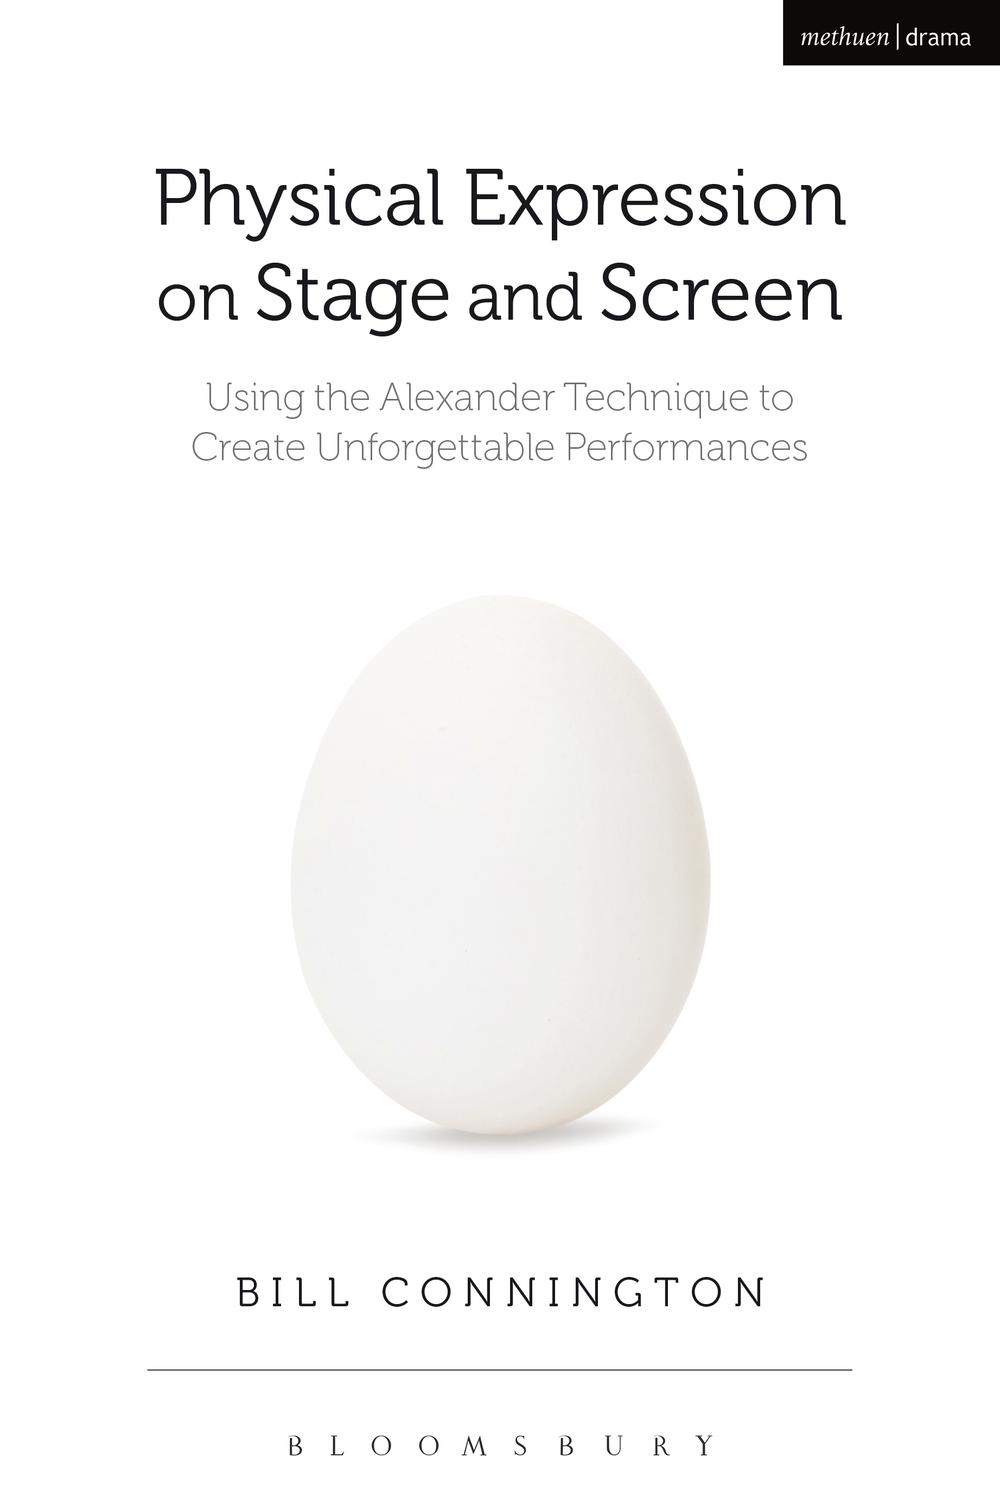 Physical Expression on Stage and Screen - Bill Connington